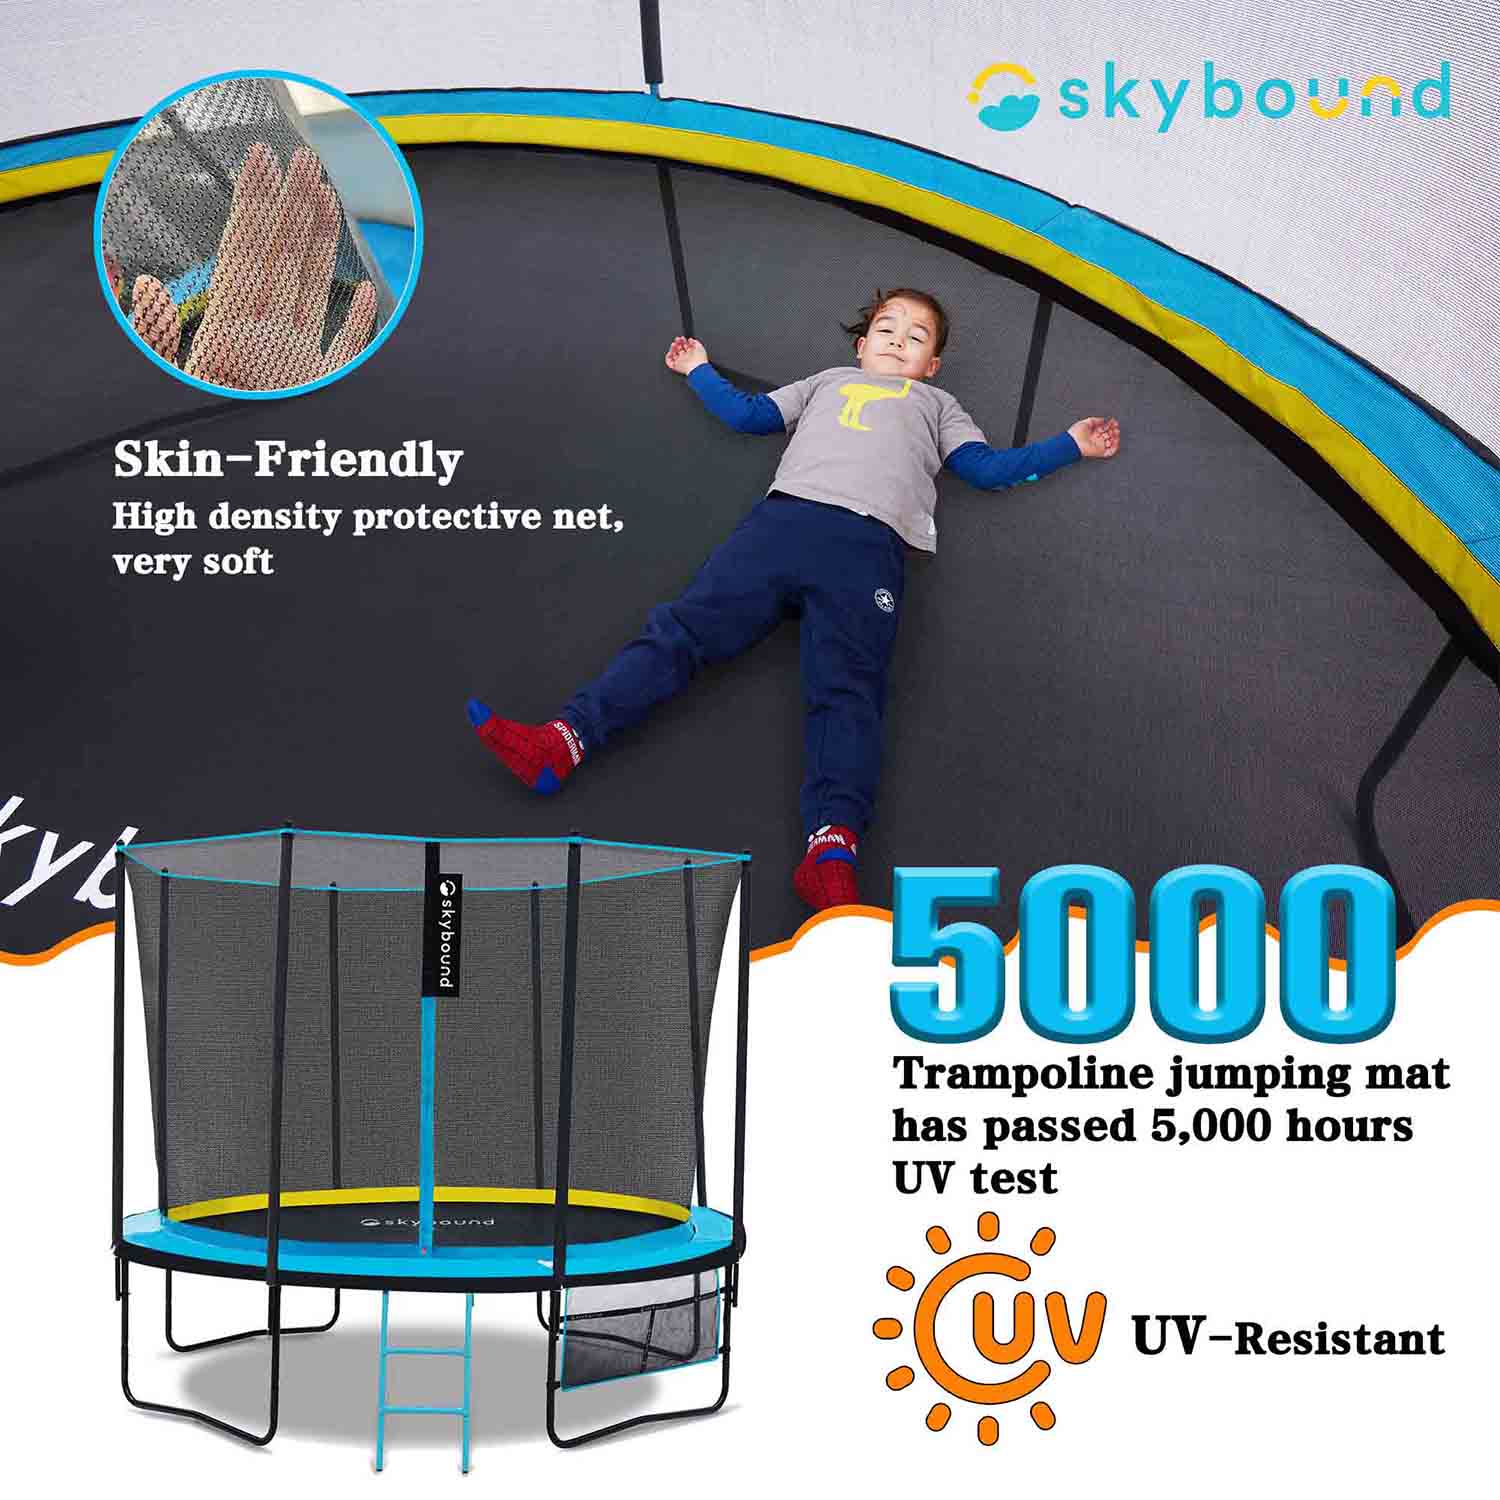 At the top, a little girl is lying on an skyrise 10ft trampoline, with a detailed image of the net in the top left corner. Below it reads "Skin-friendly high-quality softness." Beneath, next to the trampoline, it says "5000 UV tested, UV resistant.